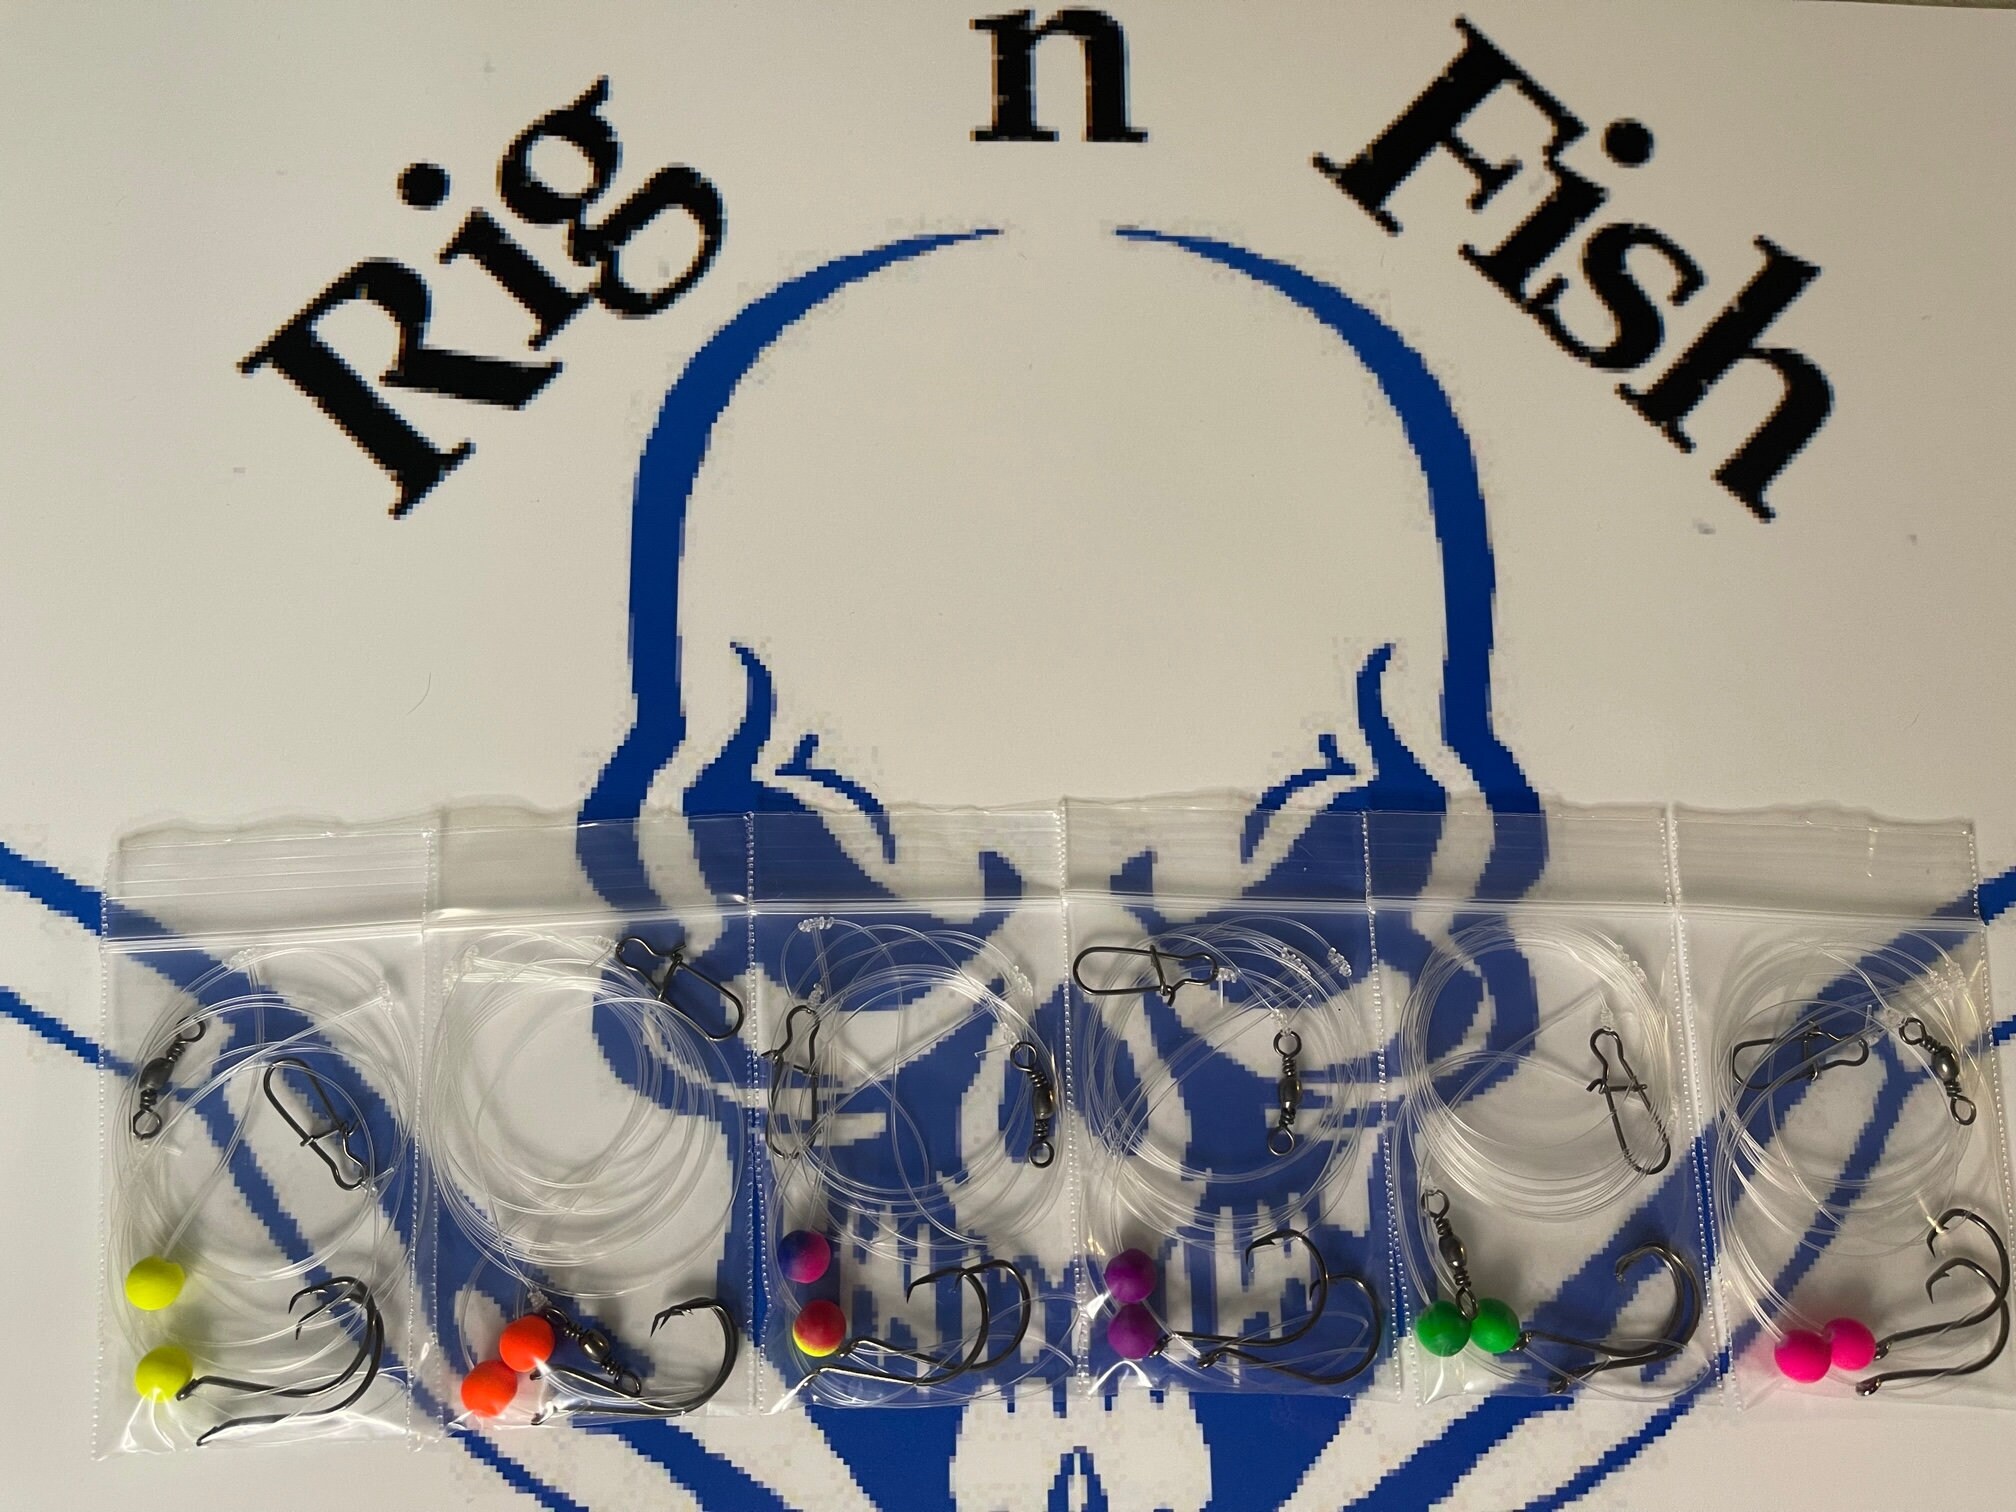 6 Hi-low Surf Fishing Rigs for Pompano Snappers, Whitingkingfish, Spots,  Croakers, Flounder, Drum, Etc. Neon Colored Beads. 